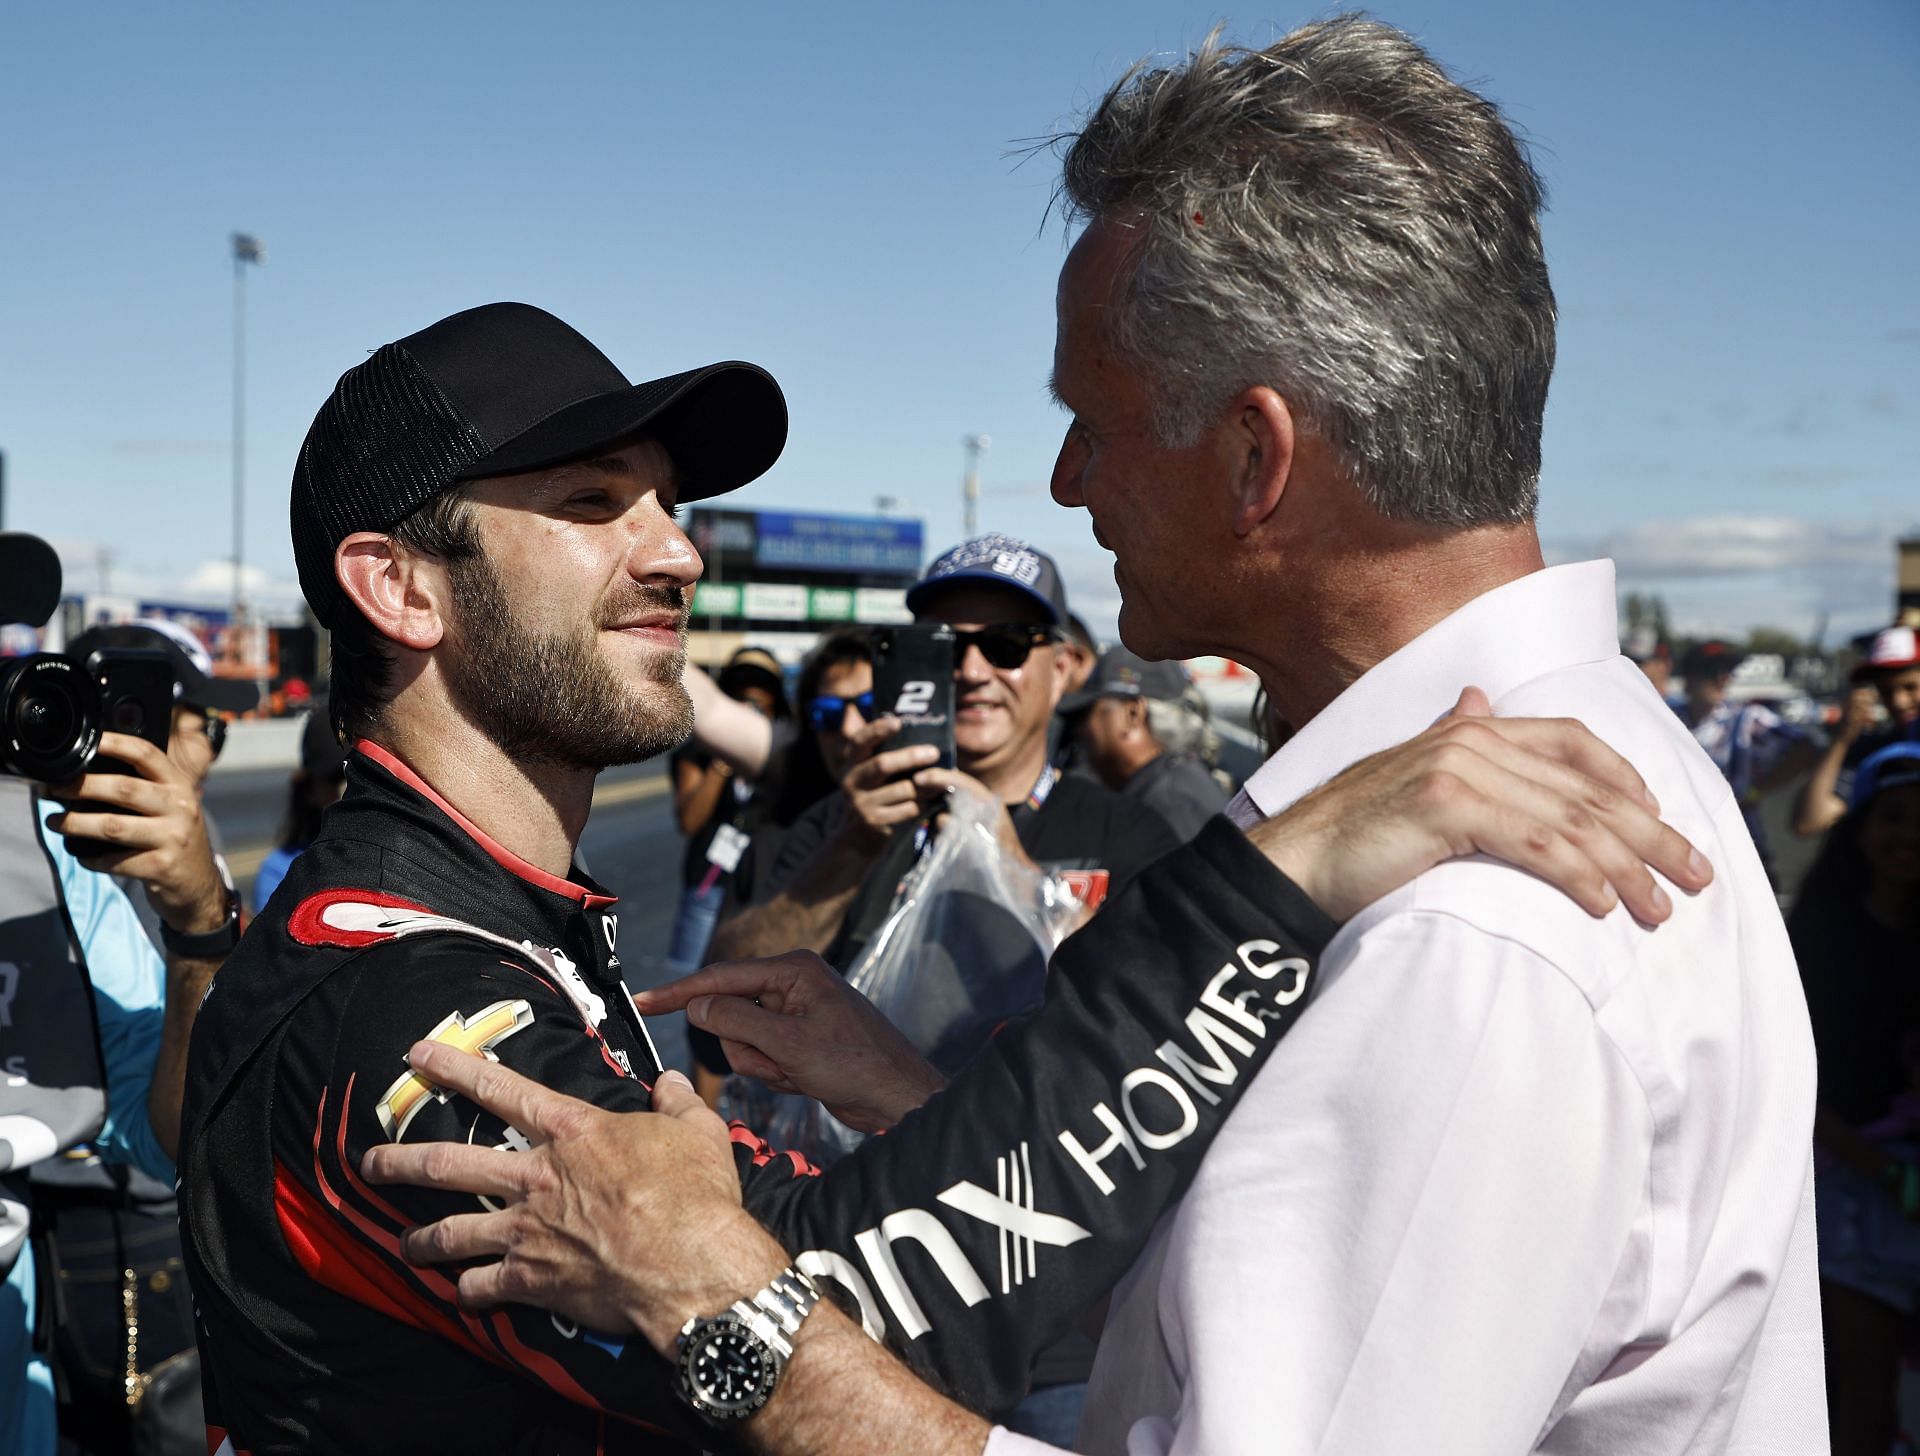 Daniel Suarez is congratulated by NASCAR president Steve Phelps after winning the 2022 NASCAR Cup Series Toyota/Save Mart 350 at Sonoma Raceway (Photo by Chris Graythen/Getty Images)